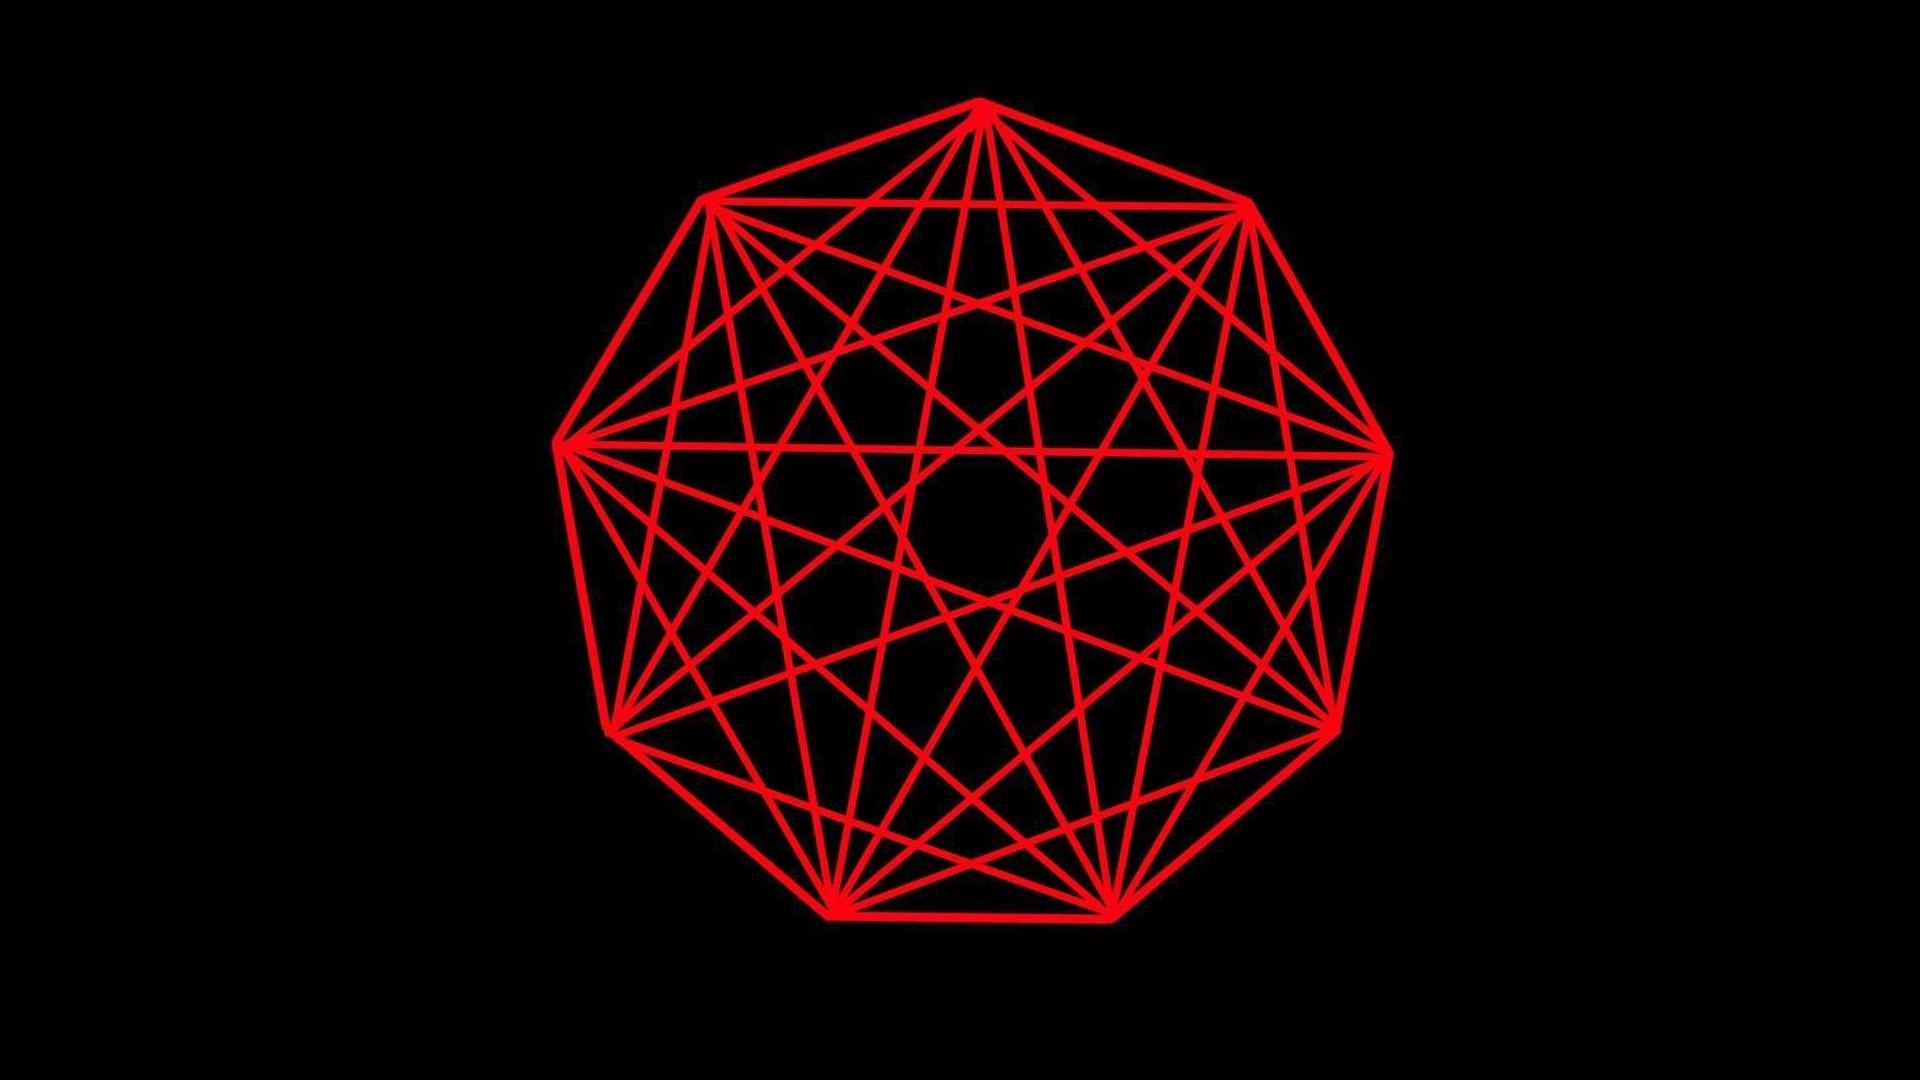 Nonagon Infinity(King Gizzard And The Lizard Wizard) • R Wallpaper. Wizard Tattoo, Infinity Wallpaper, R Wallpaper